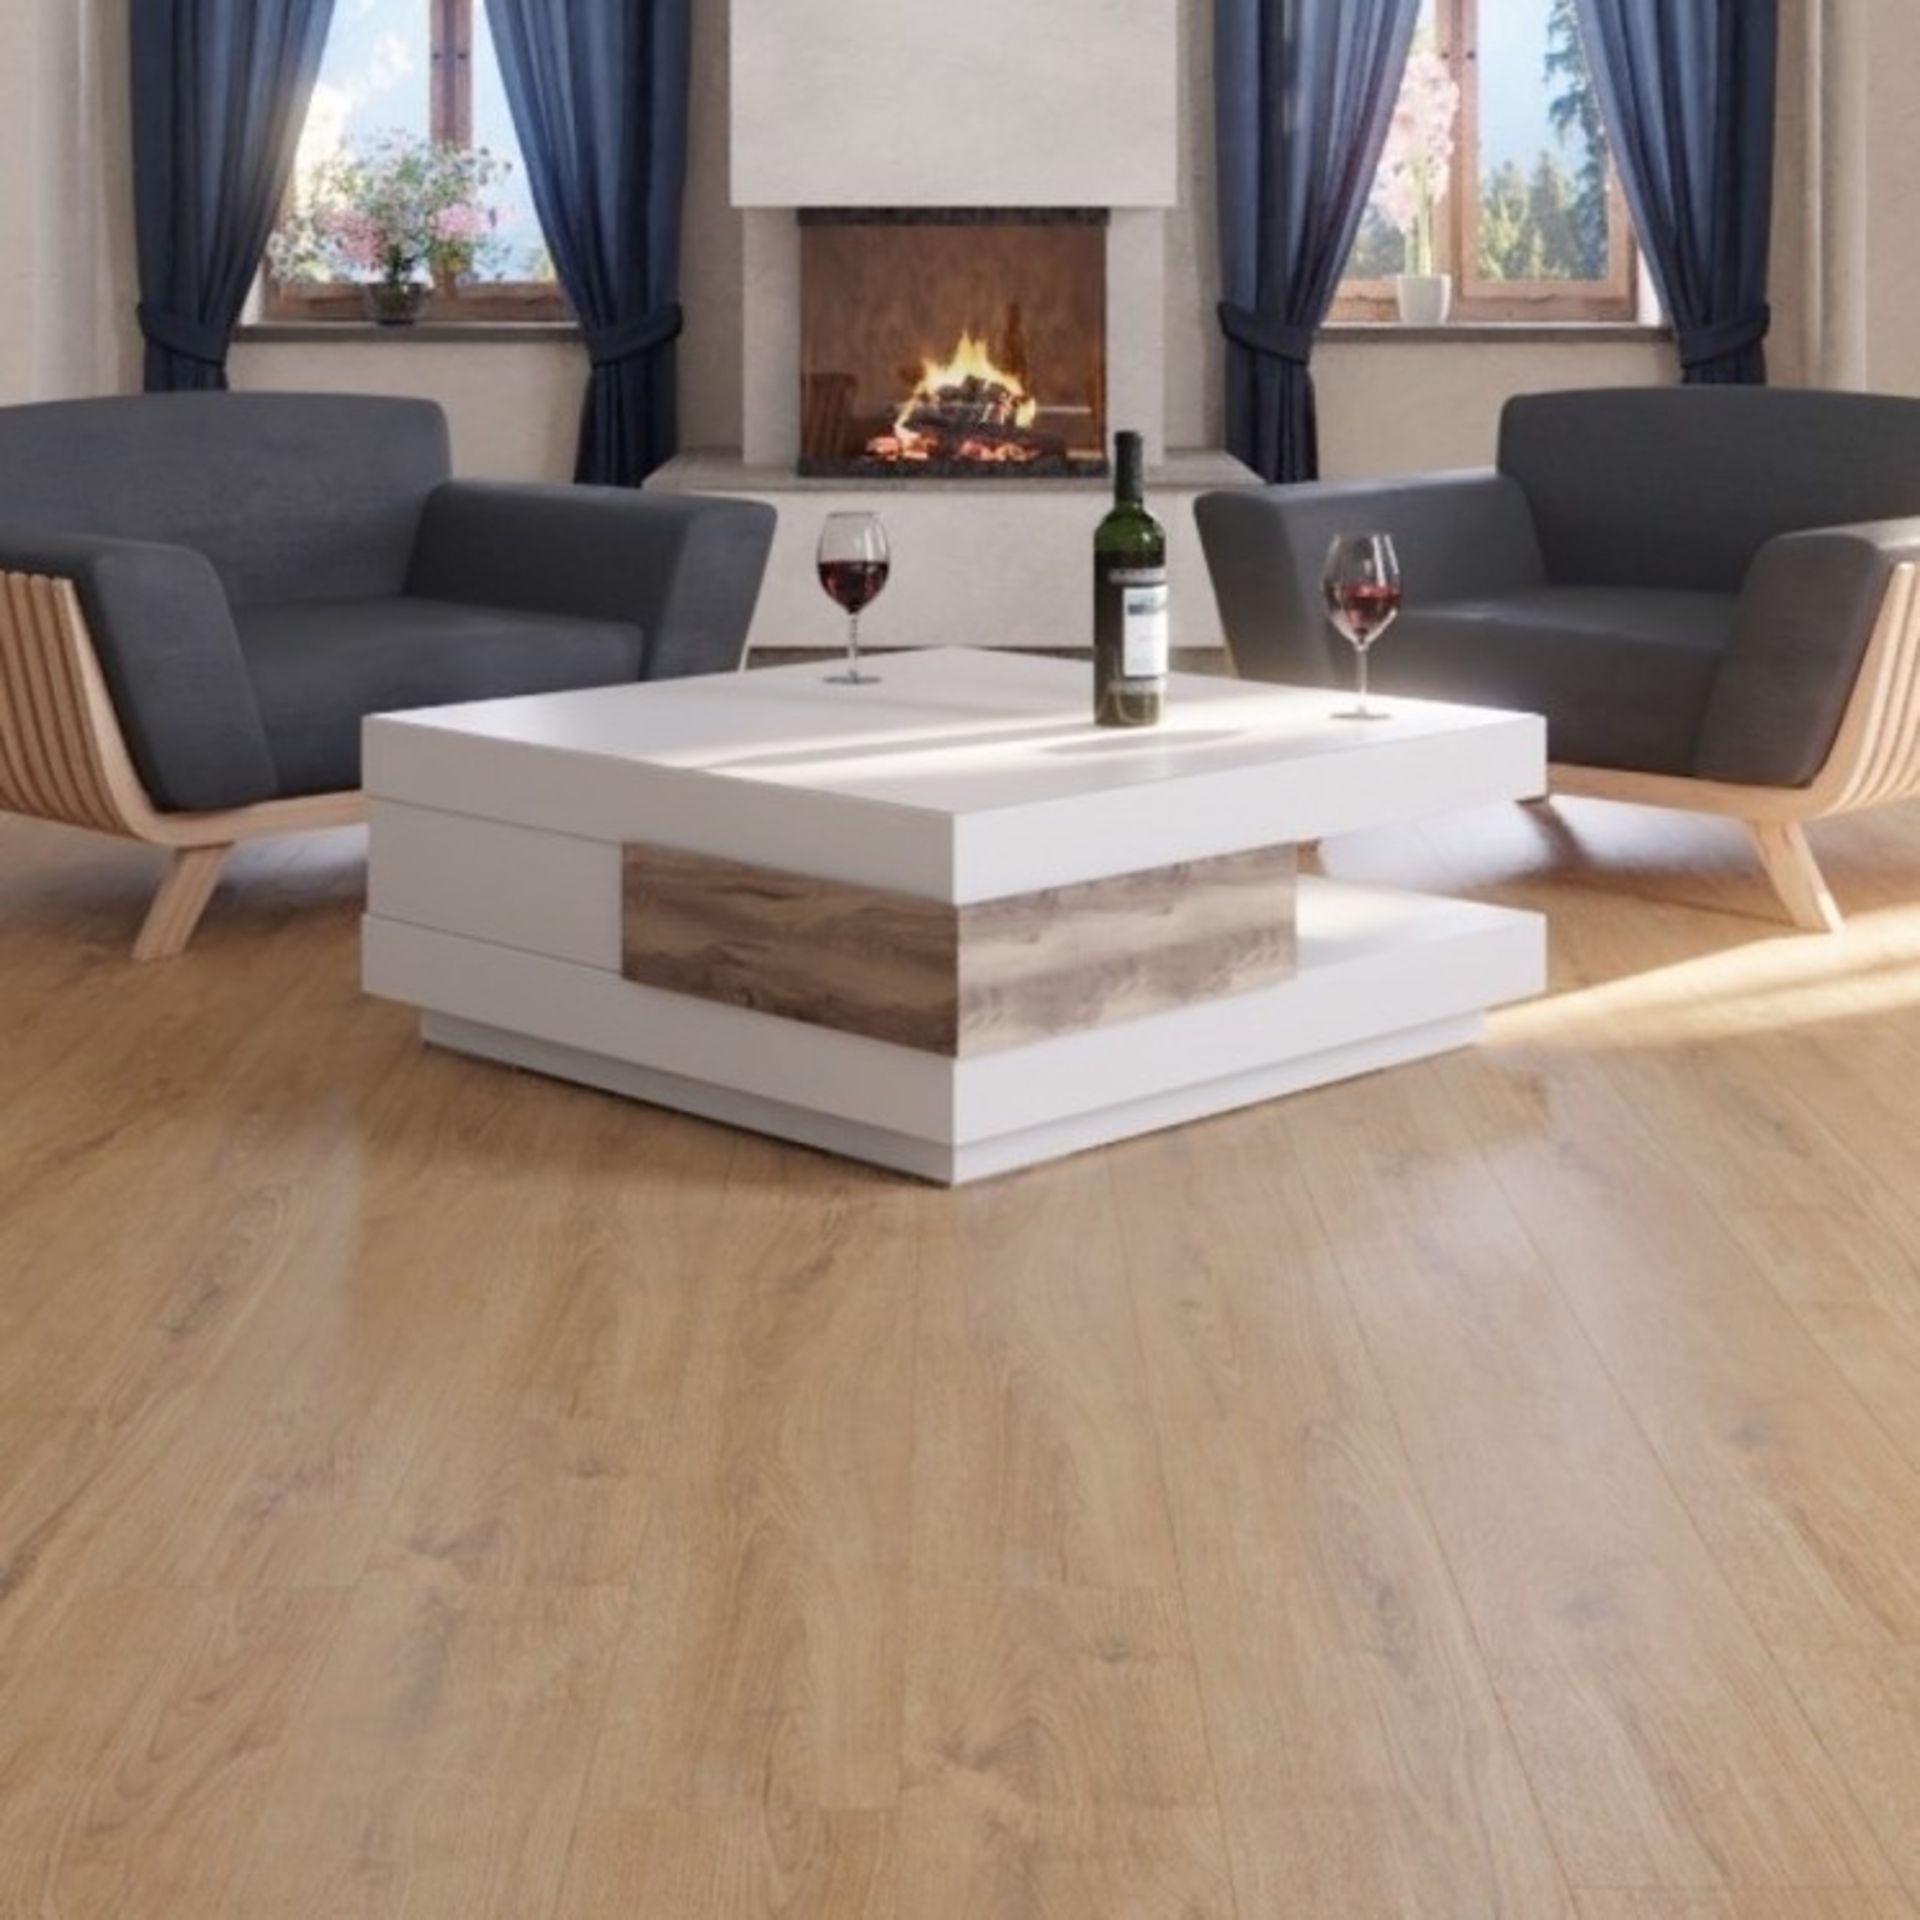 14.34m2 LAMINATE FLOORING SUMMER NATURAL OAK. With a warming natural oak tone, this floor is pe...